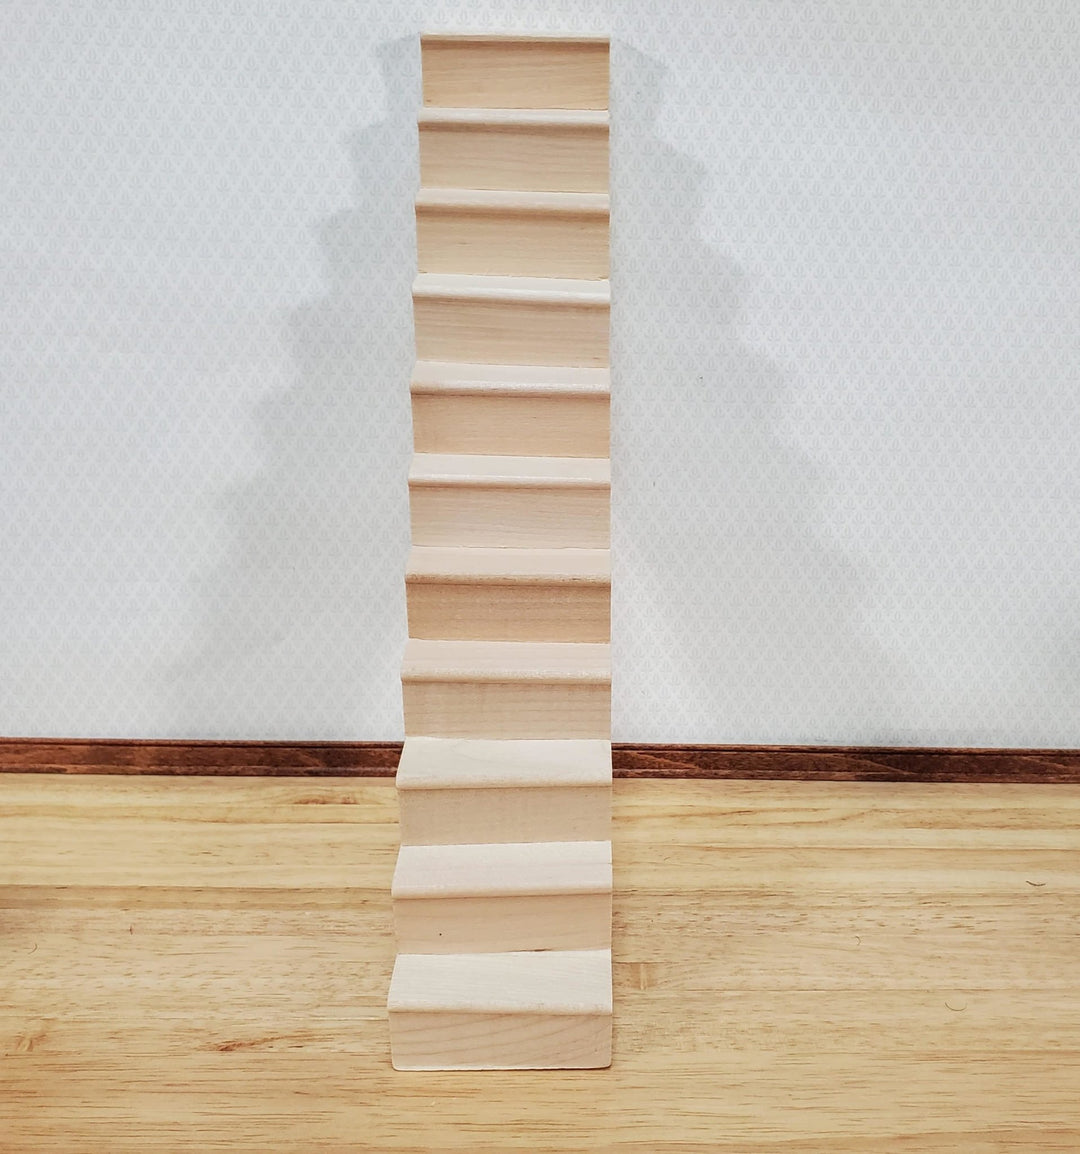 Dollhouse Narrow Stairs Stairway Up to 9.5" ceilings 1:12 Scale Miniature - Miniature Crush